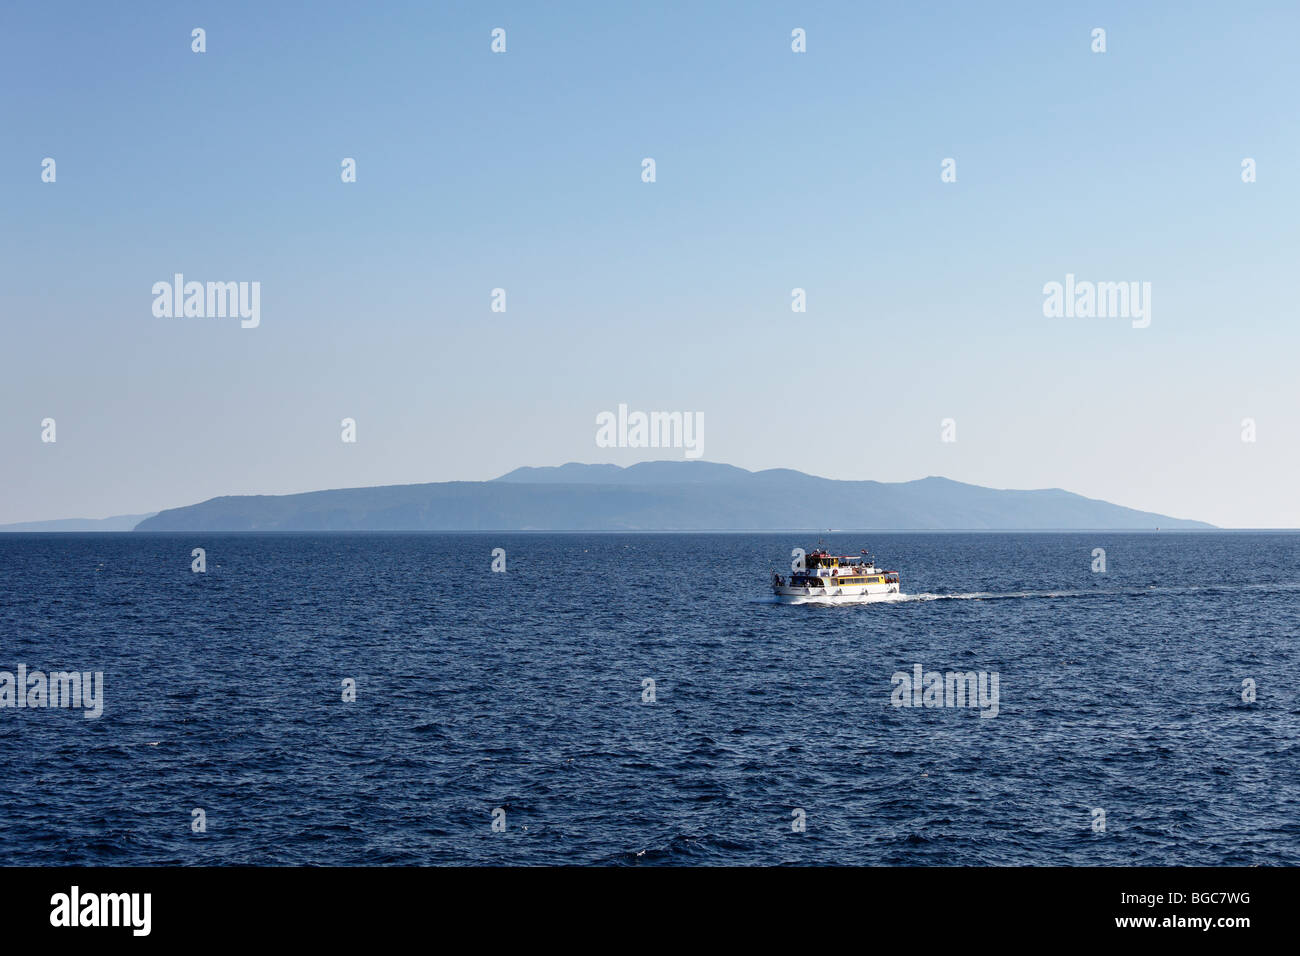 Excursion vessel off the island of Cres, view from Opatija, Istria, Kvarner Gulf, Croatia, Europe Stock Photo